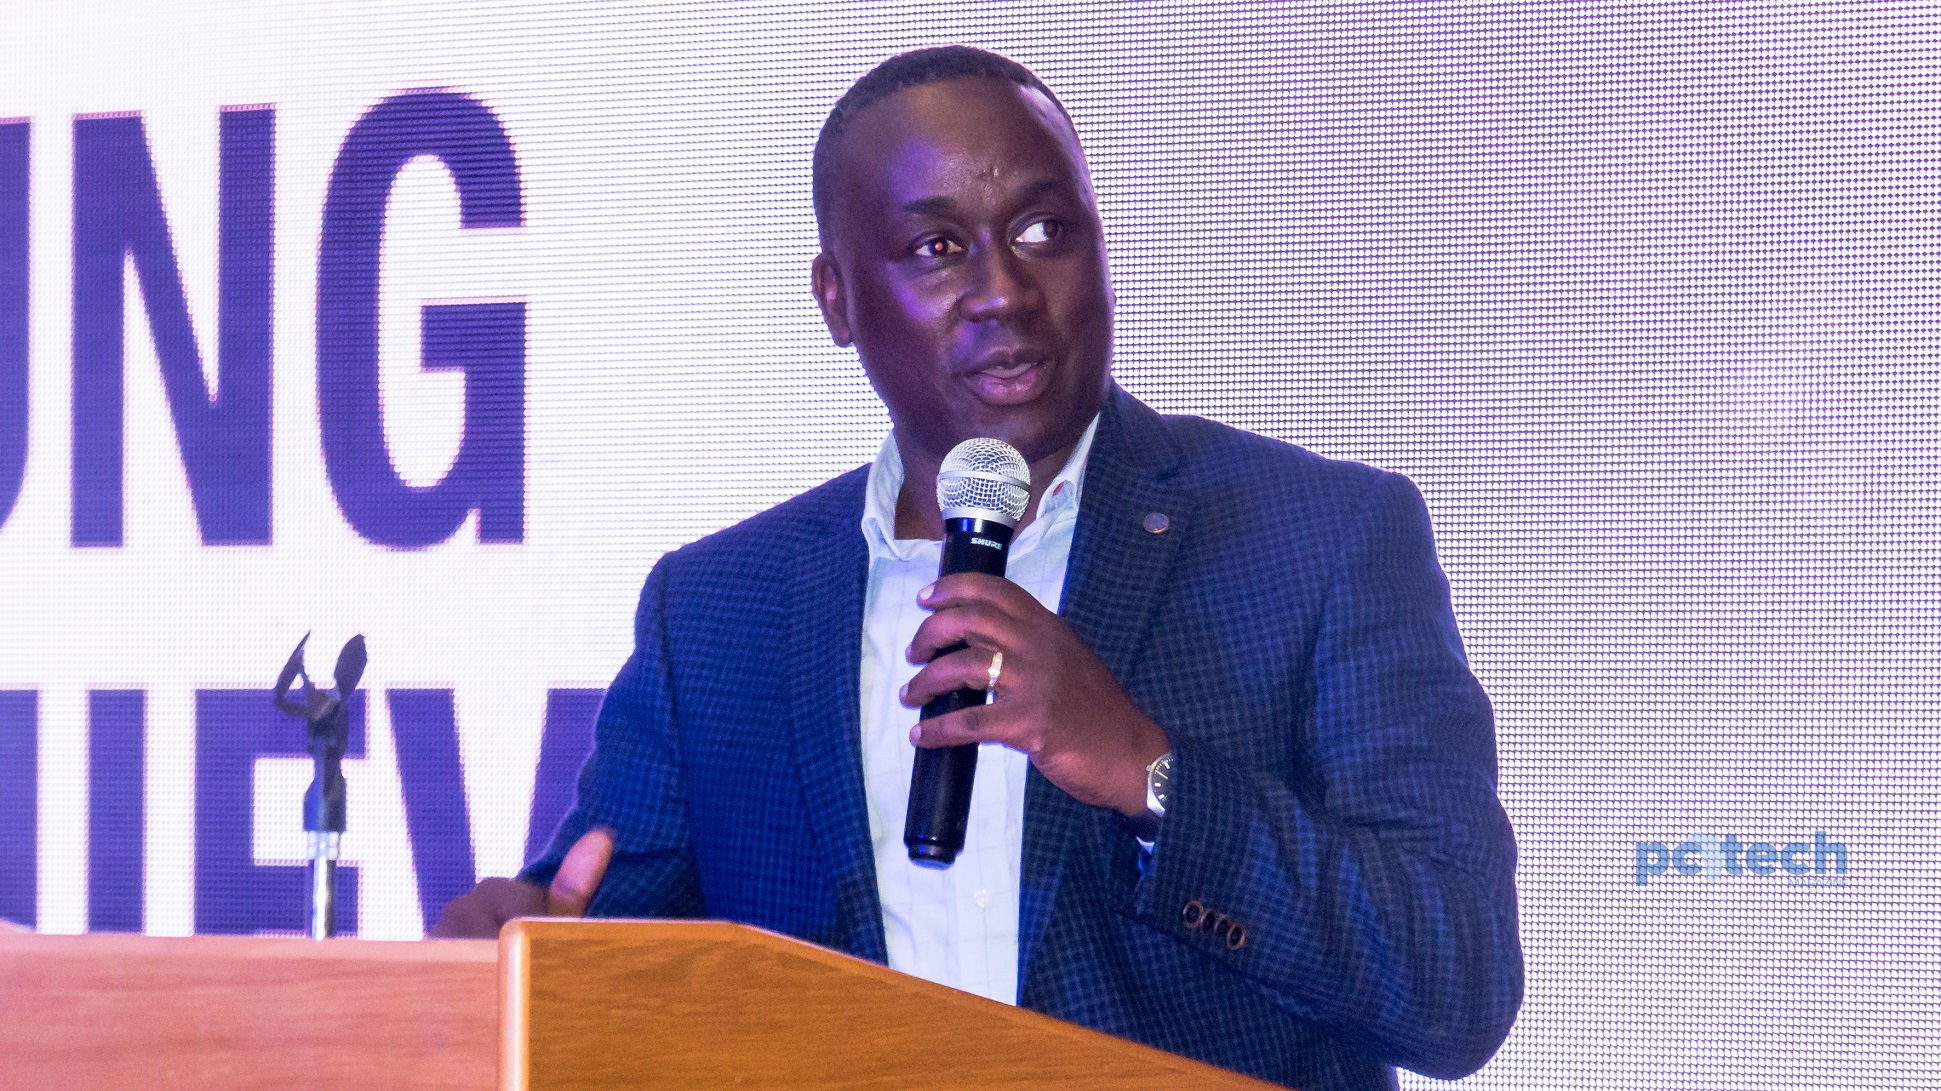 Awel Uwihanganye, Founder of the Young Achievers Awards, speaks during the unveiling of the 2018 nominees of the Young Achievers Awards at the Kampala Serena Hotel on Wednesday 1st, August 2018.